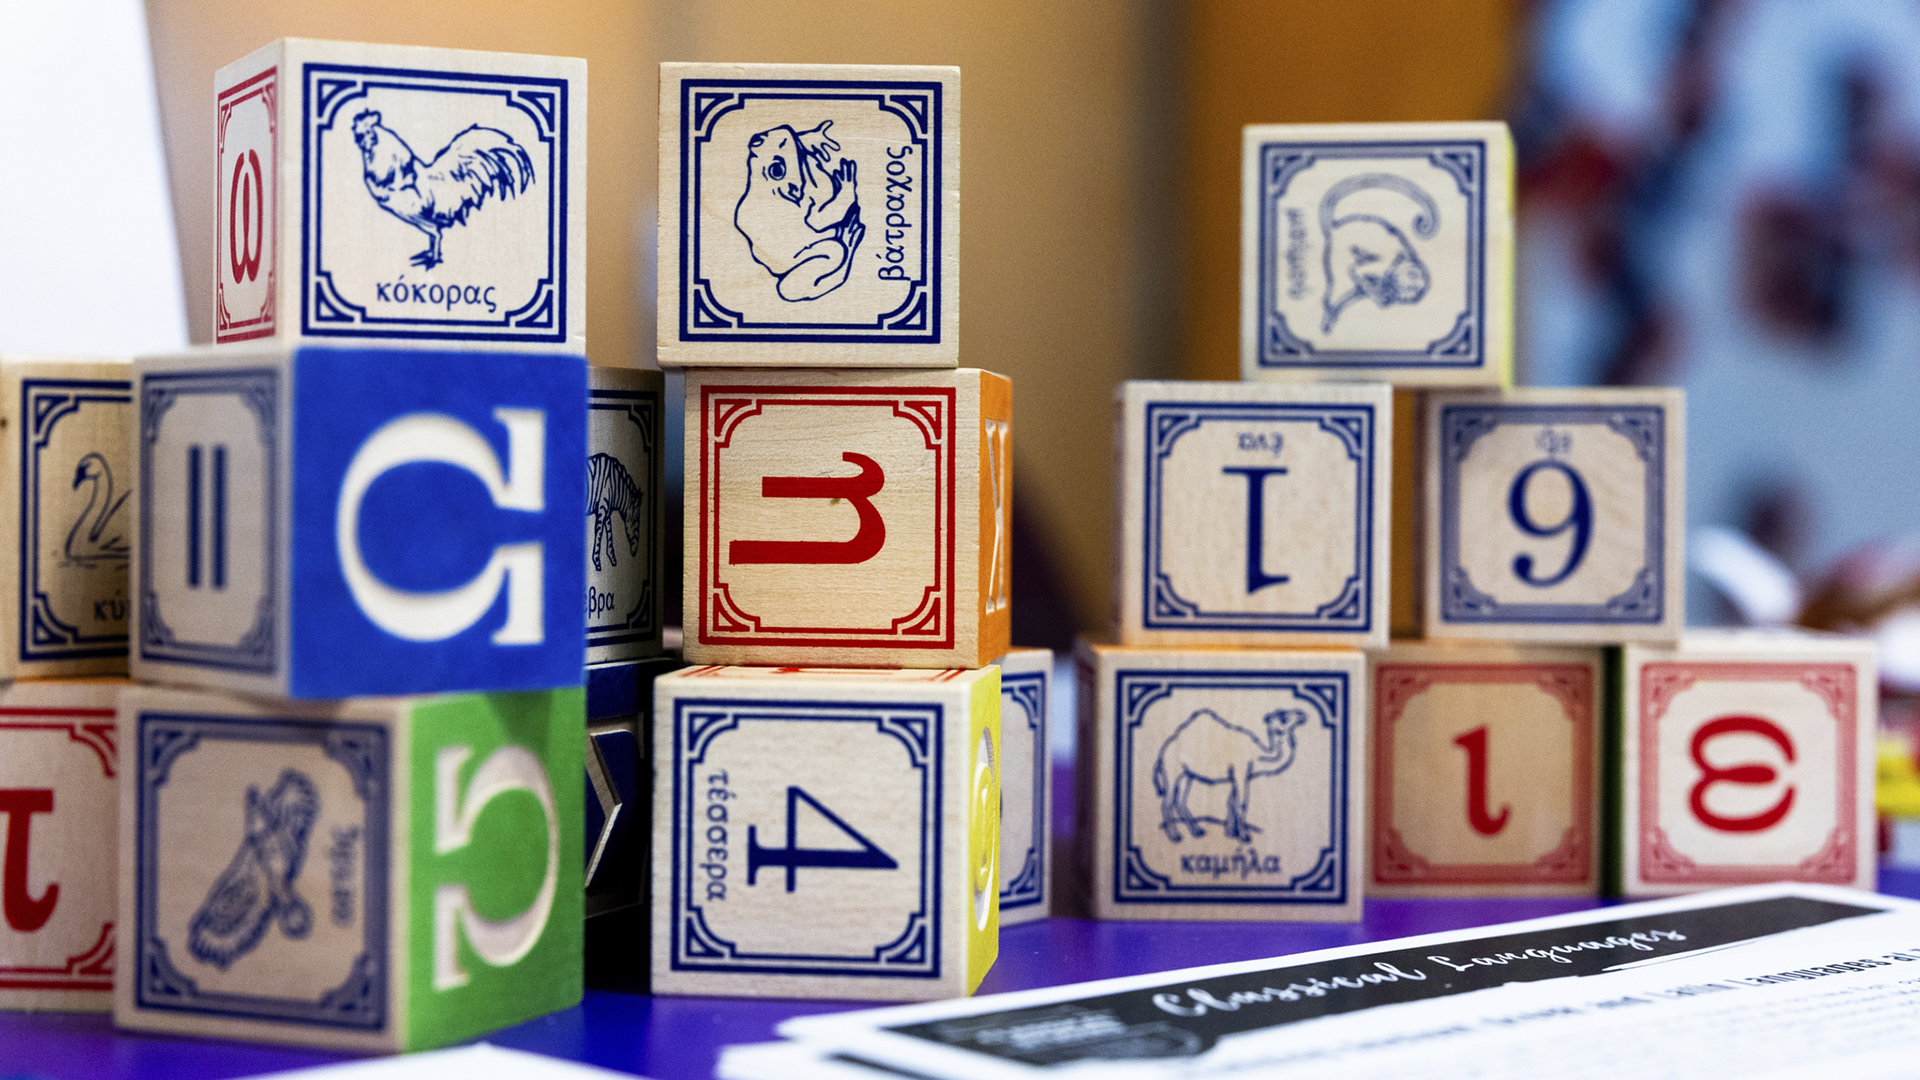 toy blocks for learning language